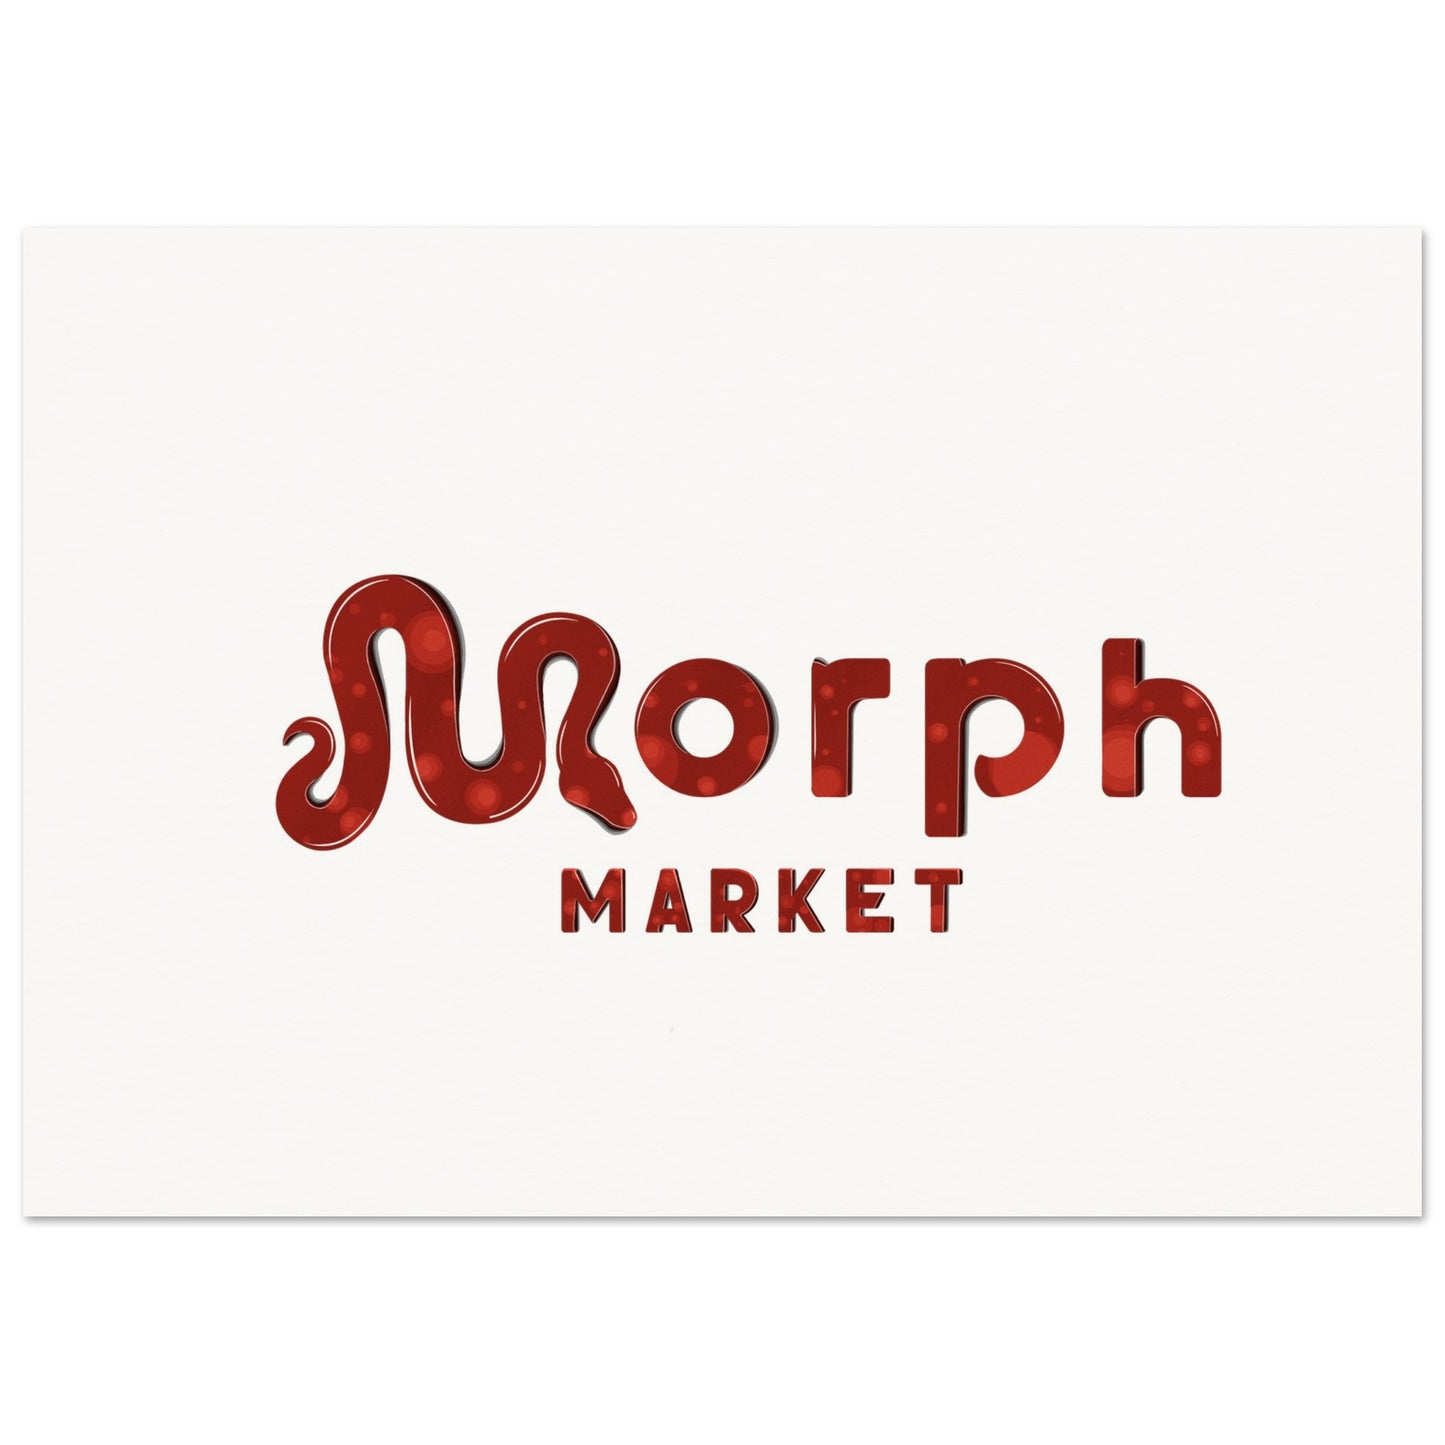 Morph Market (Red Circles) - Museum-Quality Matte Paper Poster